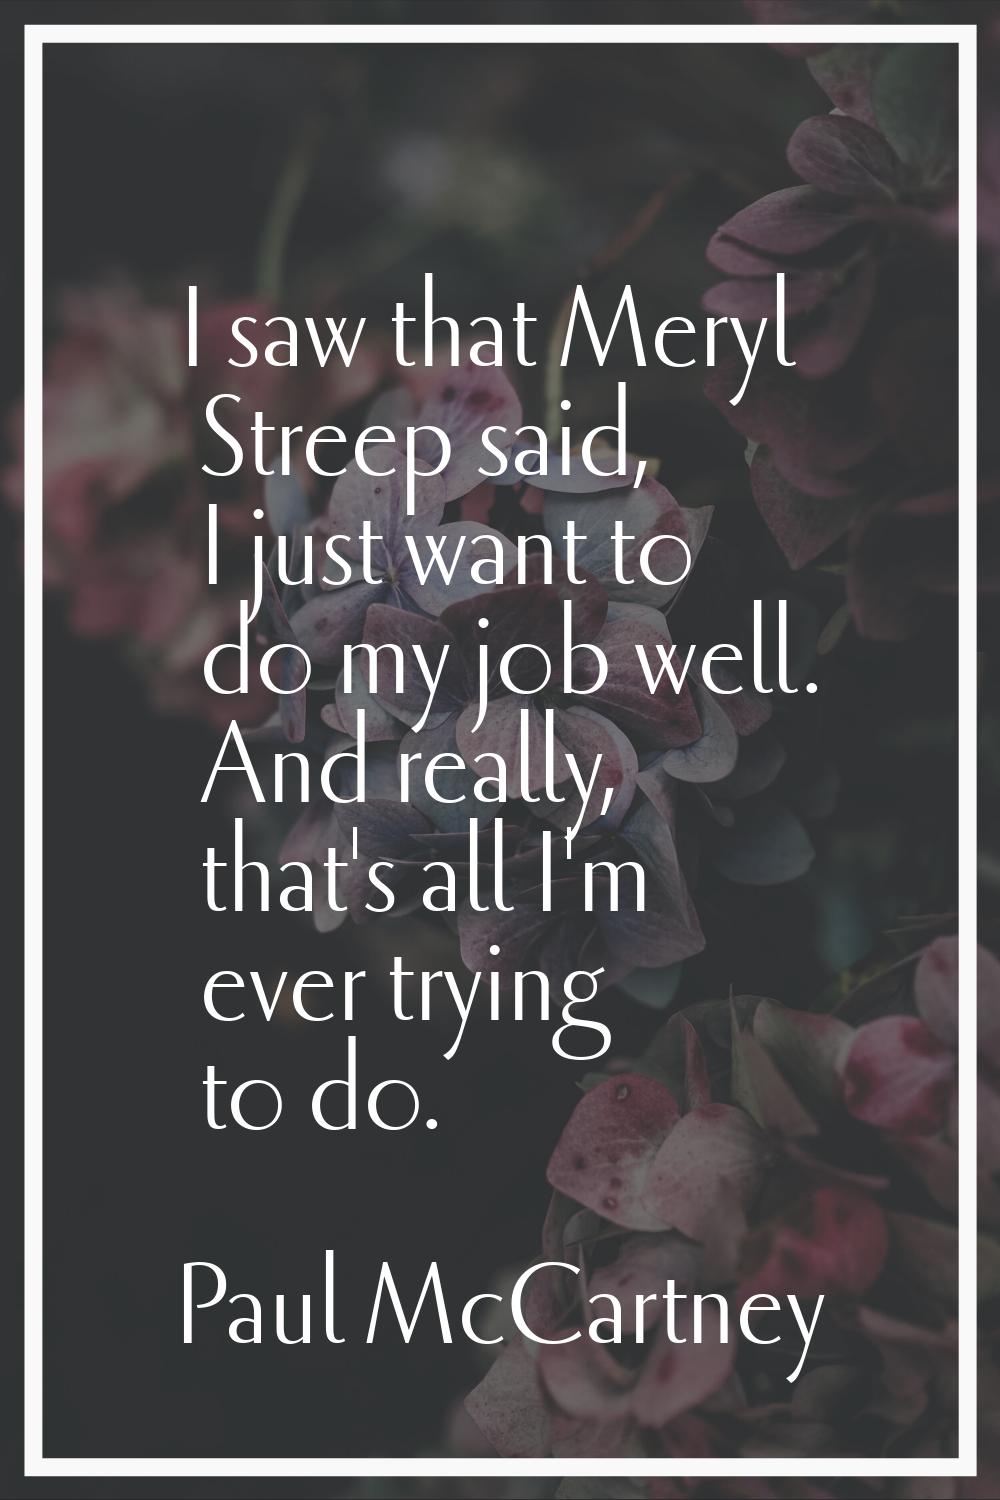 I saw that Meryl Streep said, I just want to do my job well. And really, that's all I'm ever trying